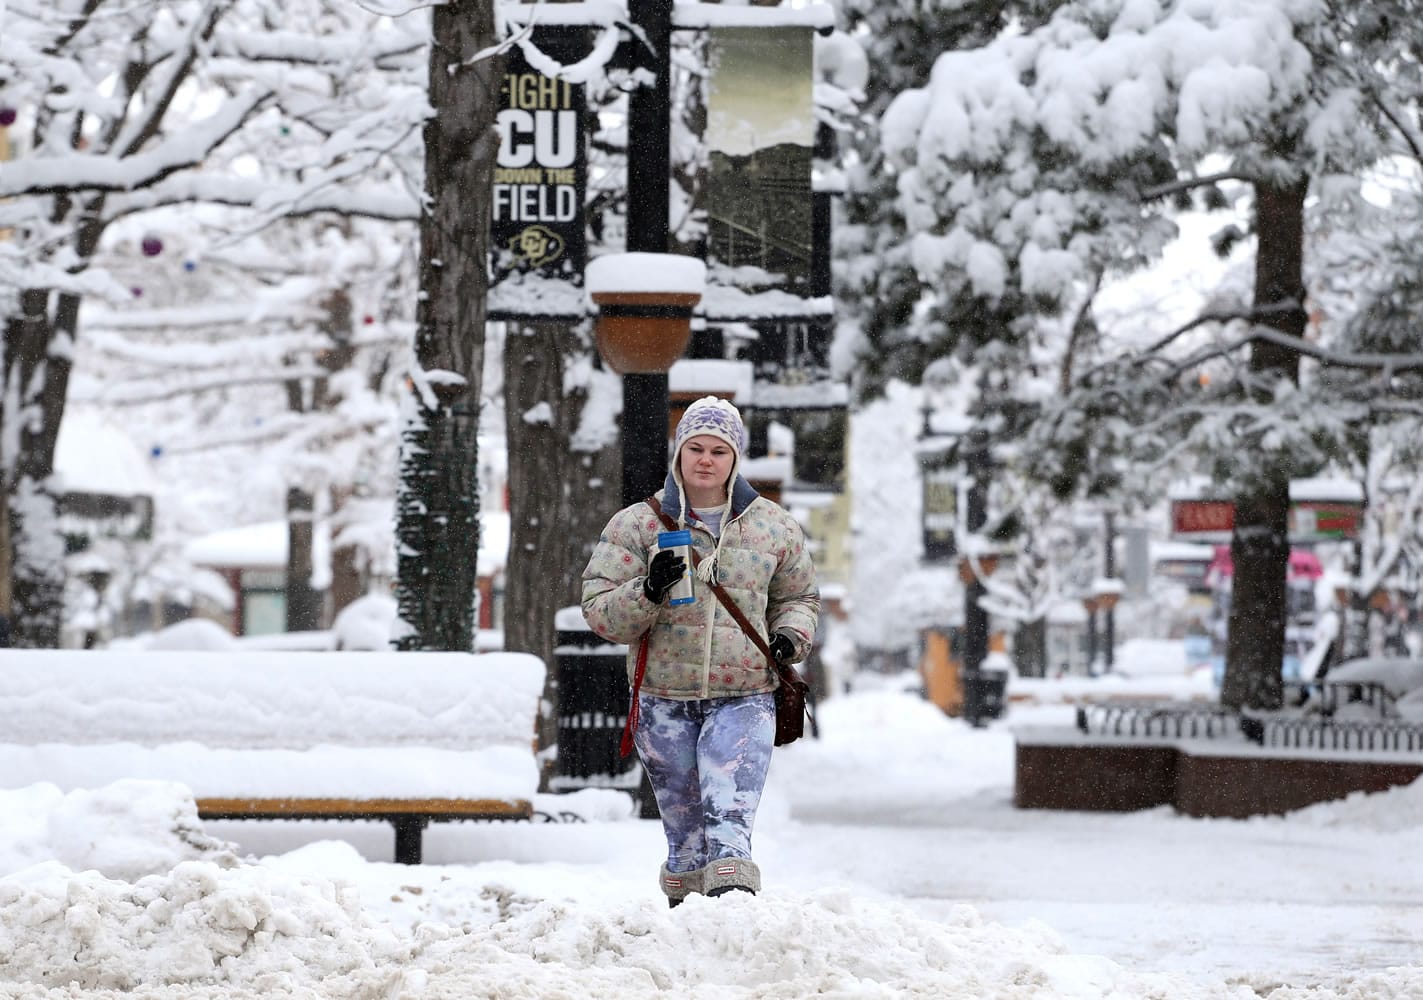 Alexa Hight of Longmont takes a stroll on the Pearl St. Mall after showing up too early for work, amid fresh snow in Boulder, Colo., Friday, Dec. 26, 2014. Parts of Colorado's mountains and plains are getting more snow, but the Christmas storm is tapering off in the Denver area.